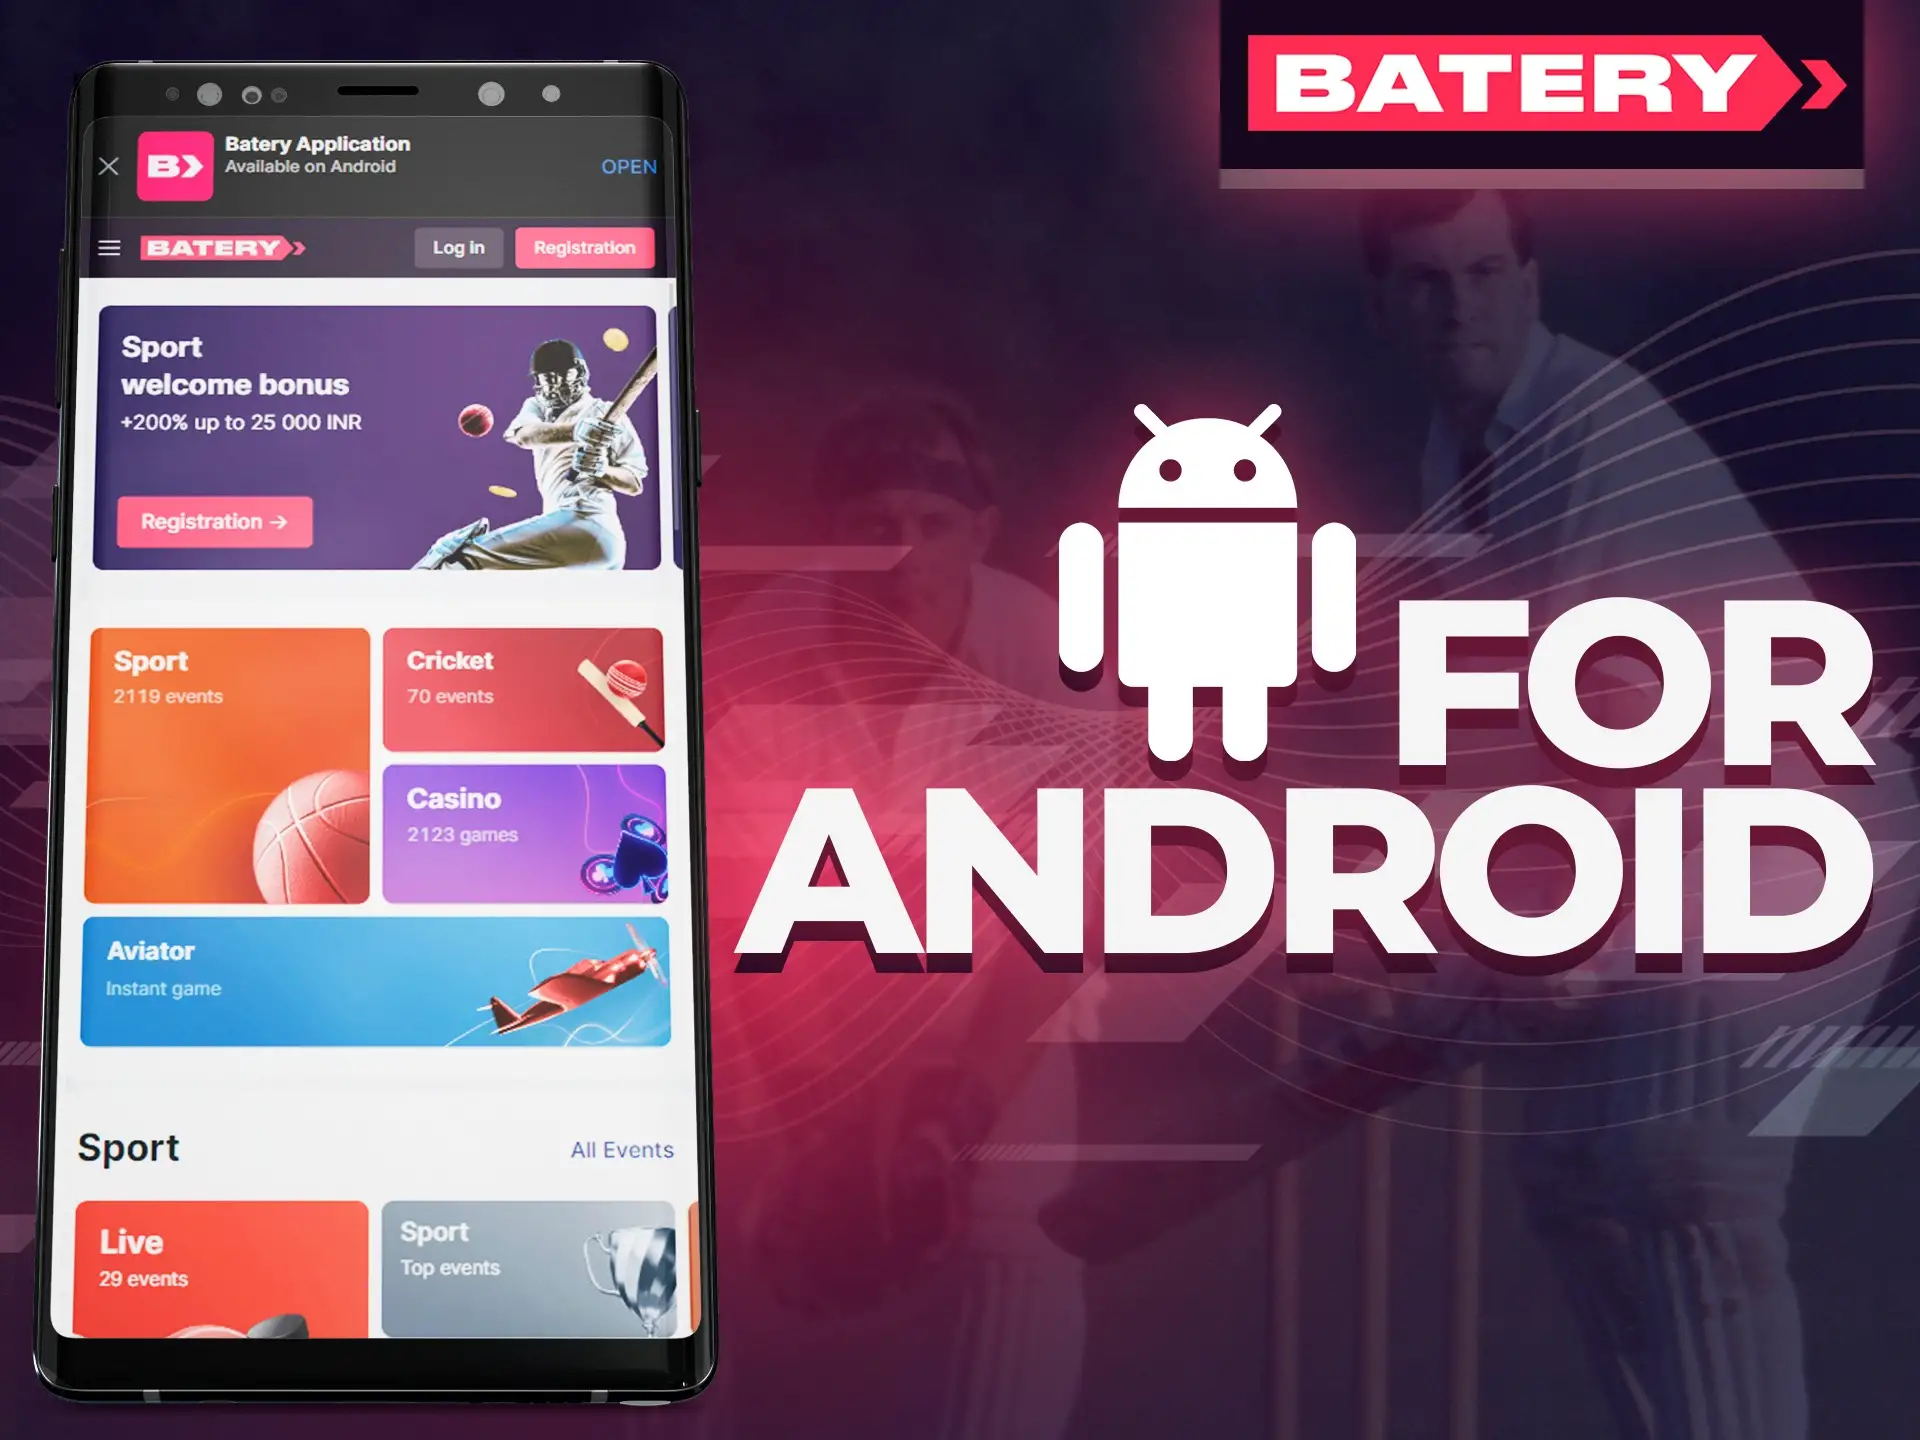 You can install Batery app on your Android phone.